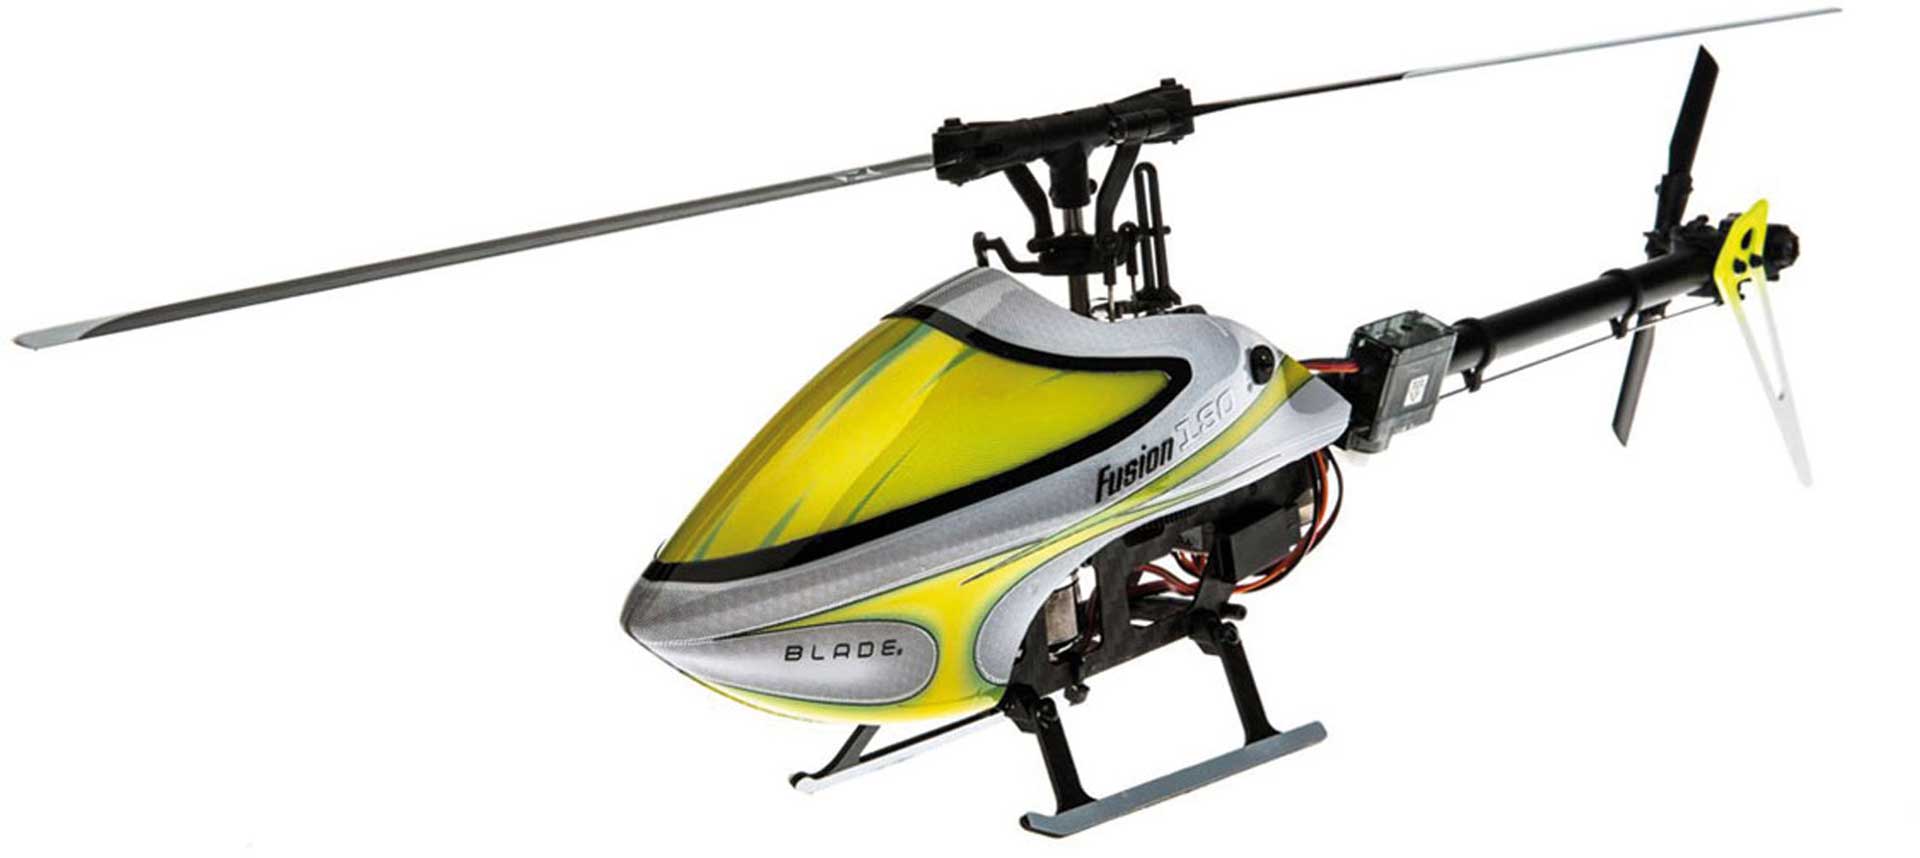 BLADE FUSION 180 BNF BASIC HELICOPTER Hubschrauber / Helikopter